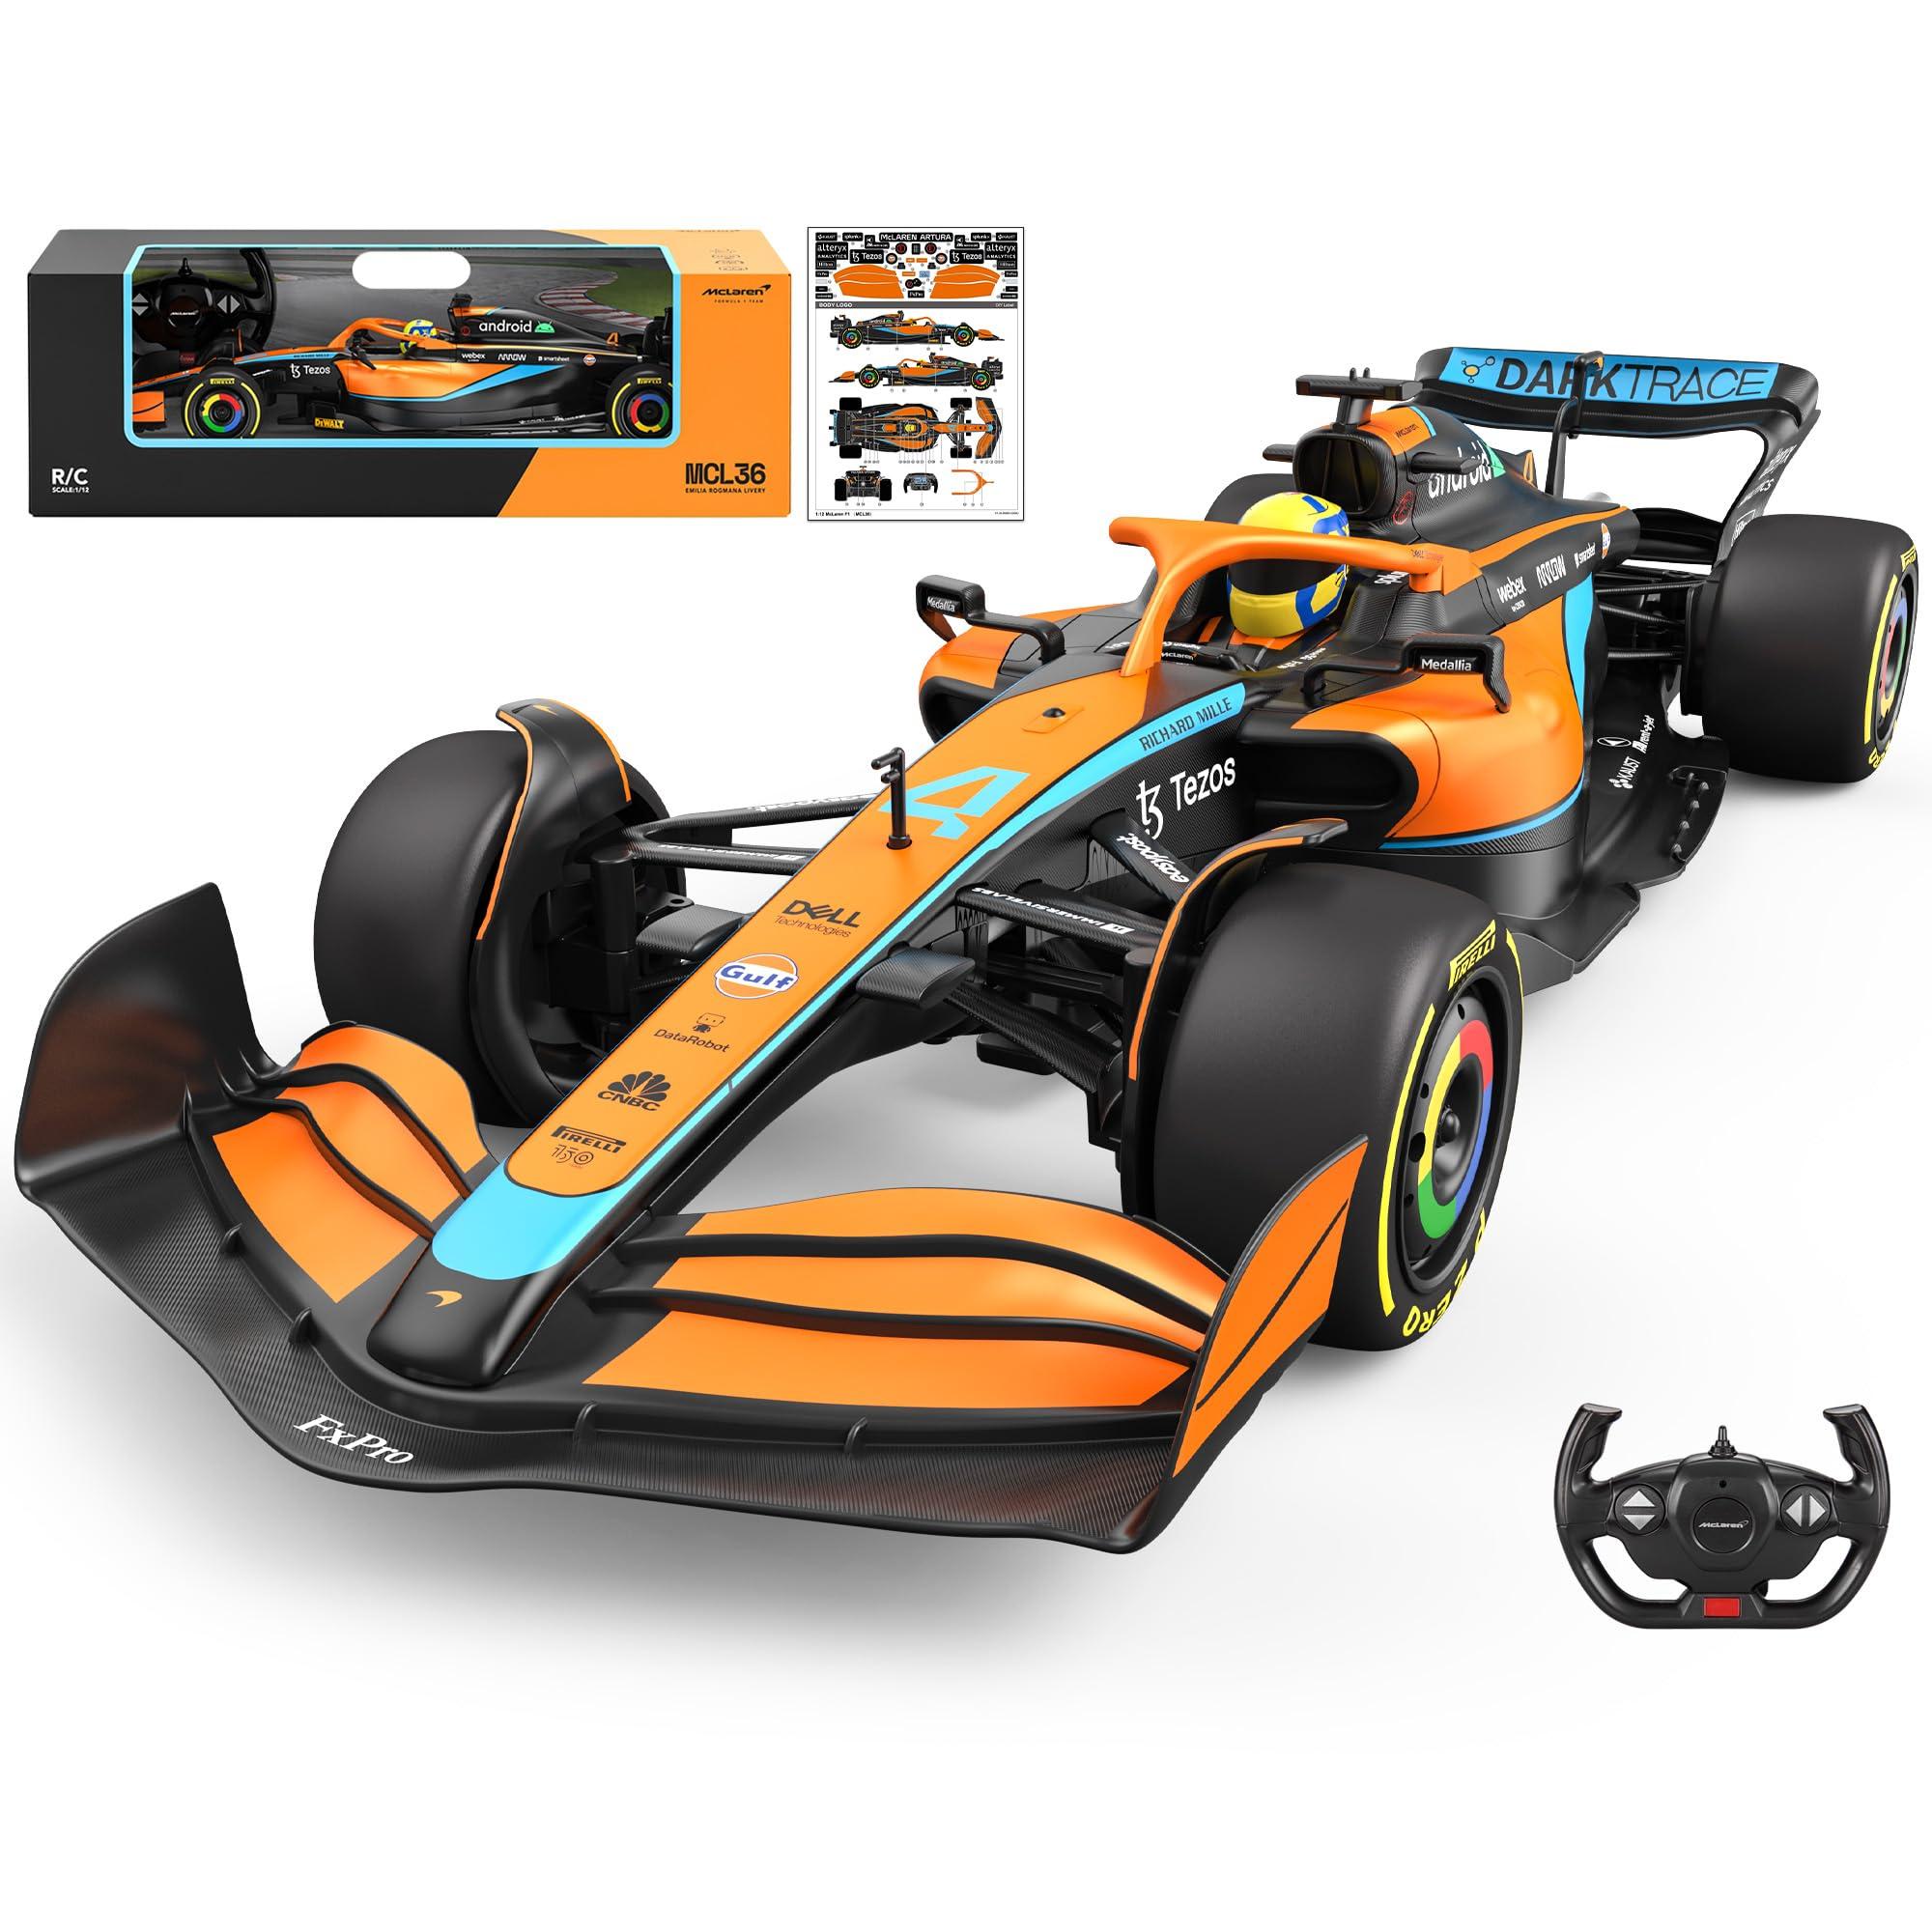 Formula 1 Rc:  Formula 1 RC cars: the ultimate in speed and precision!